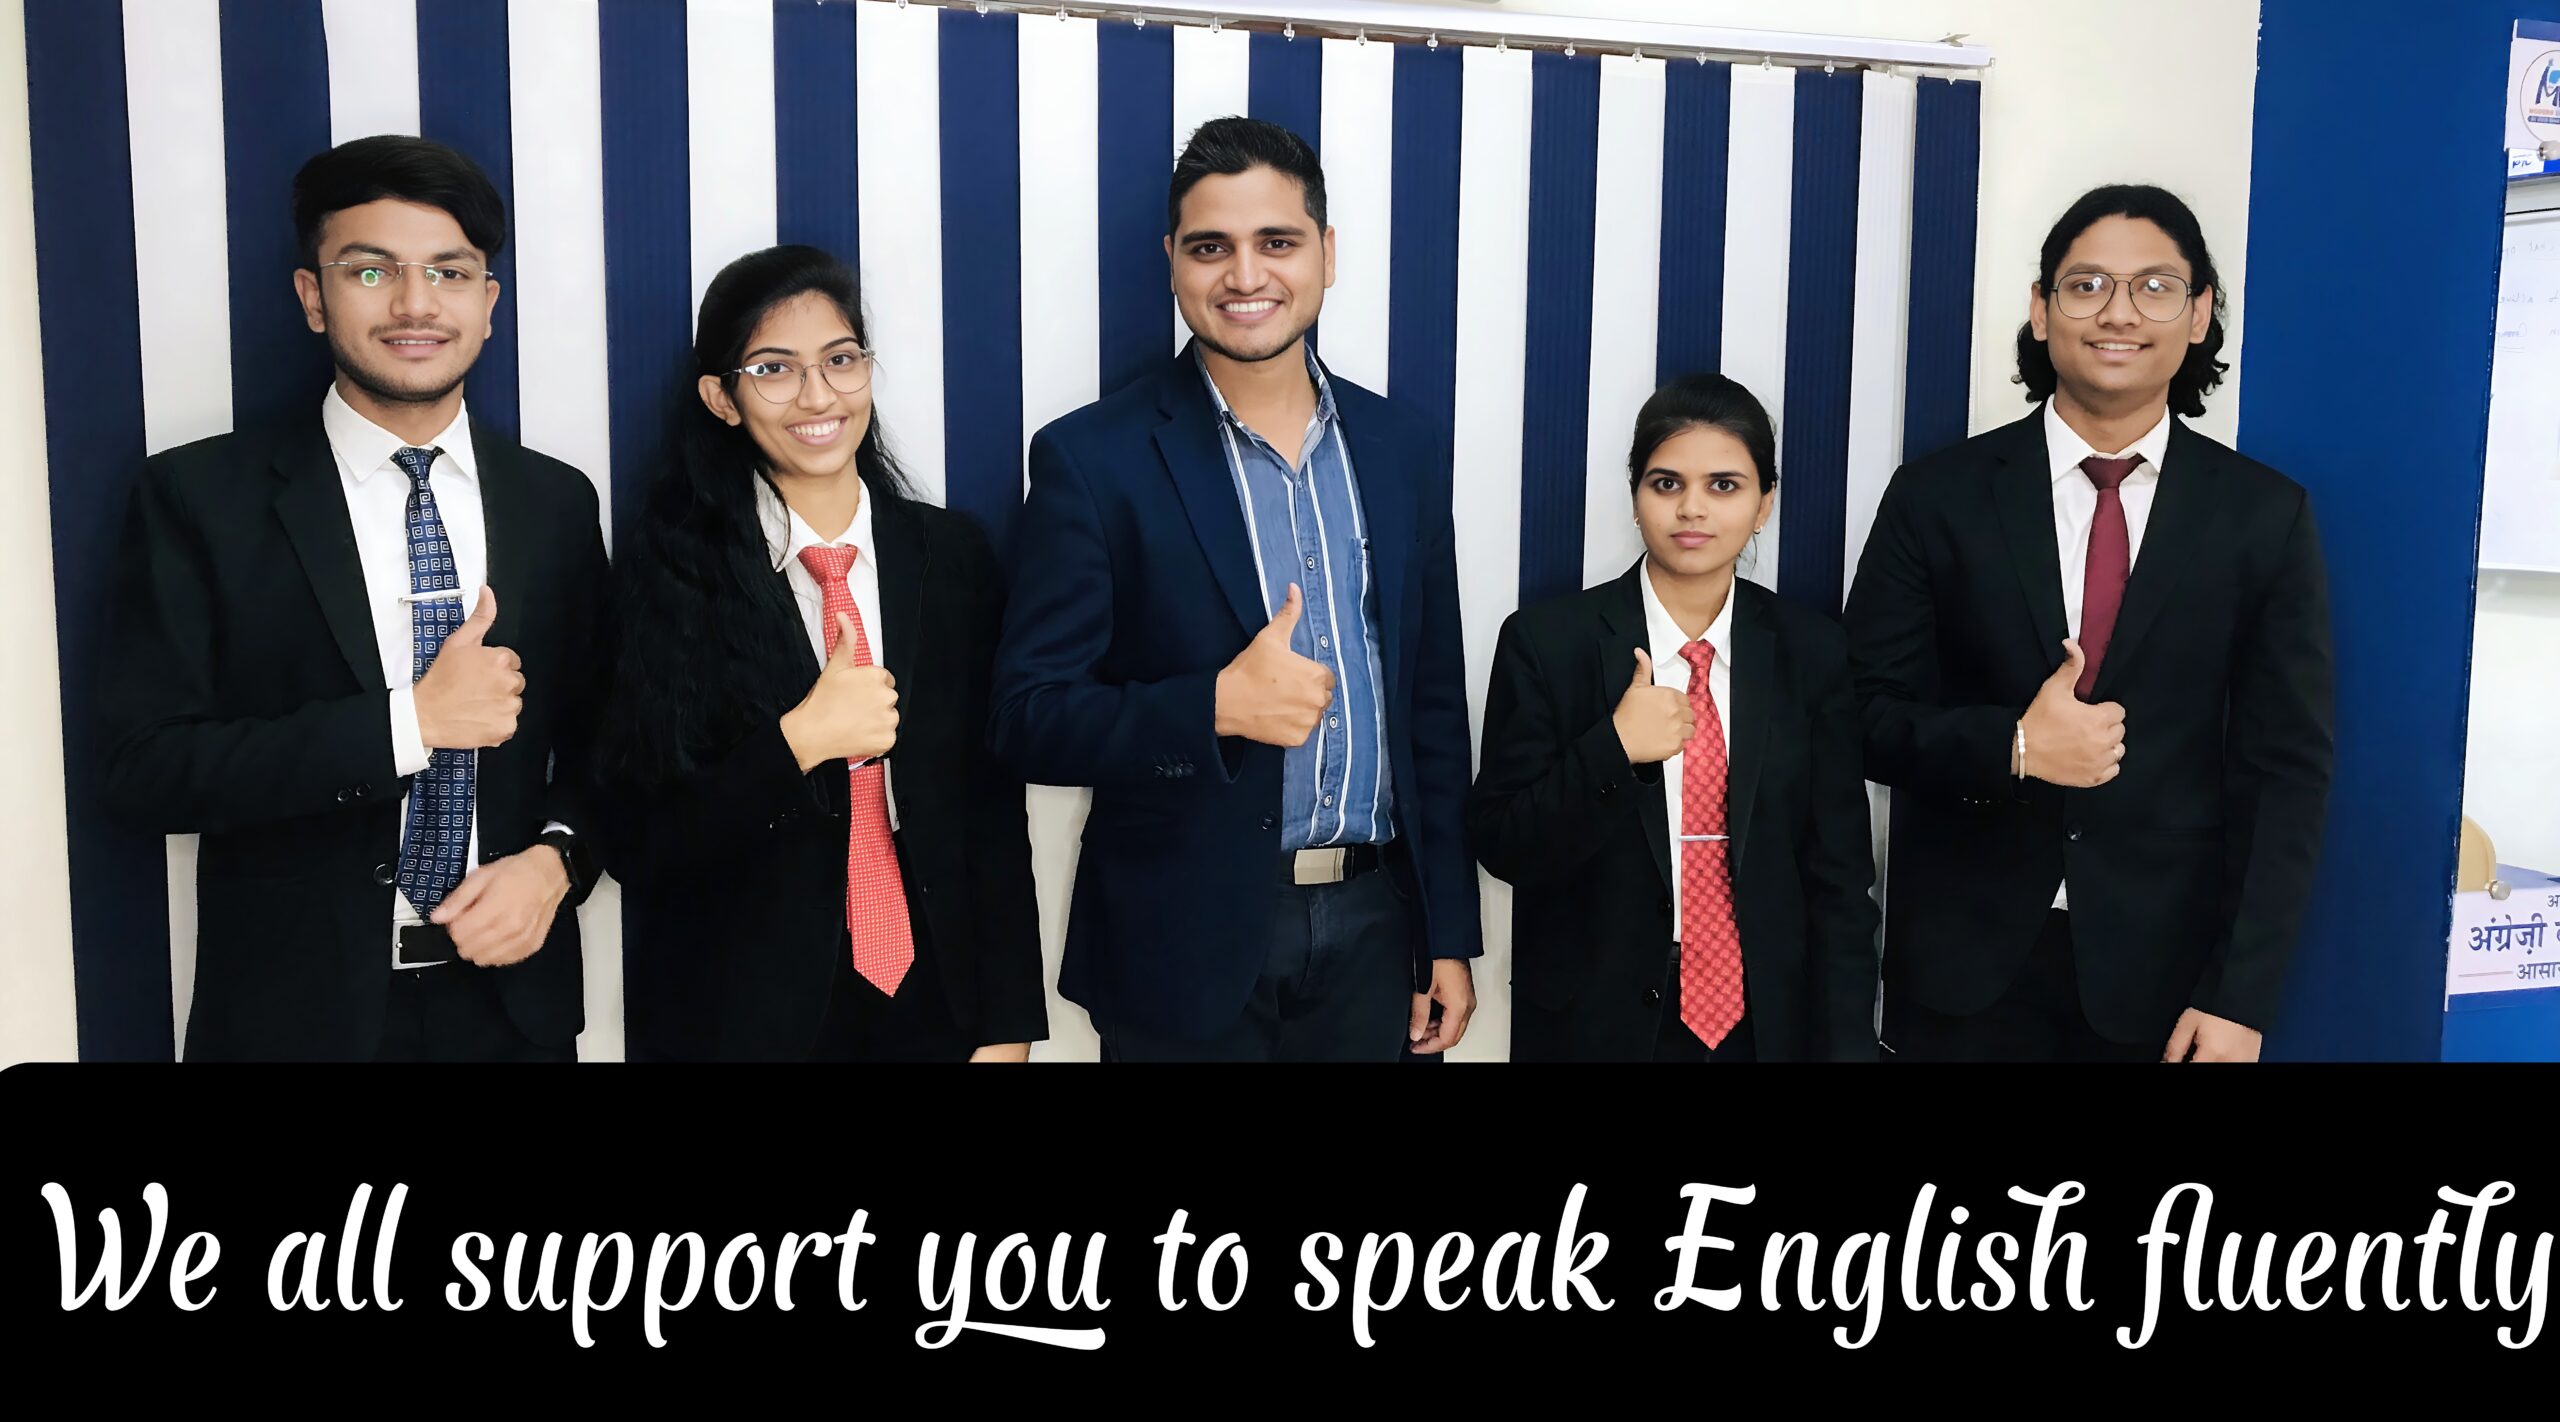 Near By Spoken English Classes#Modern+English+Bhopal #Best_Spoken_English_and_Personality_Development_Classes in Bhopal Are you searching for Spoken English Classes in Bhopal Go for #Modern+English+Bhopal they provide Spoken English classes, Personality Development Classes, Group Discussion Classes, Public Speaking Classes, PPT Presentation Classes, Debate Classes, Interview Classes, Campus Training, Conversation Classes, Campus Placement Classes, English Conversation Classes etc. Modern+English+Bhopal Best Spoken English Classes in Bhopal Spoken English Classes in Bhopal English classes in Bhopal Best Spoken English Classes Spoken English Classes English classes #"Spoken_English¬_classes_in_Bhopal" #"Best English-speaking institute in Bhopal" #"English speaking course Bhopal" Modern+English+Bhopal #"Learn spoken English in Bhopal" #"English speaking coaching centres near me" #"Top spoken English tutors in Bhopal" #"English fluency classes Bhopal" #"Affordable spoken English classes Bhopal" #"Online English-speaking courses in Bhopal" #"English language training institutes in Bhopal" Spoken English classes Personality Development Classes Group Discussion Classes Public Speaking Classes PPT Presentation Classes Debate Classes Interview Classes Campus Training Conversation Classes Campus Placement Classes English Conversation Classes Thank You Bhopal for Overwhelming Response Are you searching for Spoken English Classes in Bhopal Go for Modern English, they provide Spoken English classes, Personality Development Classes, Group Discussion Classes, Public Speaking Classes, PPT Presentation Classes, Debate Classes, Interview Classes, Campus Training, Conversation Classes, Campus Placement Classes, English Conversation Classes #Spoken_English_and_Personality_Development_Classes in Bhopal #Modern+English+Bhopal Are you searching for Spoken English and personality Development Classes in Bhopal Go for #Modern+English+Bhopal #Spoken_English coaching classes in Bhopal https://modernenglish.in/ #Spoken_English_Coaching_Class_in_Bhopal #English_Conversation_Class_in_Bhopal https://modernenglish.in/ #English Conversation class in Bhopal #spokenenglish https://modernenglish.in/ #english #learnenglish #ielts #vocabulary #englishspeaking #englishvocabulary Modern+English+Bhopal #englishlearning #grammar #englishgrammar #speakenglish #englishteacher #easyenglish https://modernenglish.in/ #englishtips #hinditoenglish #education #learnenglishonline #englishidioms #spokenenglishclasses #learningenglish #englishclass https://modernenglish.in/ #Modernenglishbhopal #speaking #studyenglish# #Spoken_English_and_Personality_Development_Classes in Bhopal Google :- WEBSITE :- https://modernenglish.in/ Google :- Modern+English+Bhopal Modern English MP Nagar Branch https://g.co/kgs/HJKwA3 Google :- Modern English Ashoka Garden Branch https://g.co/kgs/wGmHmx Youtube :- Modern English https://www.youtube.com/@MODERNENGLISH_Bhopal Twitter :- Modern English https://twitter.com/Modern_MpNagar Modern English Telegram https://t.me/Modern_English_PDF Modern English Ashoka Garden Branch Wa.me/918821976221 Modern English MP Nagar Branch Wa.me/918823876221 Instagram :- Modern English MP Nagar Branch https://instagram.com/modern_english_mpnagar?igshid=ZDdkNTZiNTM= Facebook Page :- Modern English MP Nagar Branch https://www.facebook.com/profile.php?id=100083099122742... Facebook ID :- Modern English https://www.facebook.com/modern.english.397?mibextid=ZbWKwL Instagram :- Modern English Ashoka Garden Branch https://instagram.com/modern_english_ashokagarden?igshid=ZDdkNTZiNTM= Facebook Page :- Modern English Ashoka Garden Branch https://www.facebook.com/ModernEnglishBhopal?mibextid=ZbWKwL #Modern_English_Bhopal Google :- WEBSITE :- https://modernenglish.in/ Google :- Modern English MP Nagar Branch https://g.co/kgs/HJKwA3 Youtube :- Modern English https://www.youtube.com/@MODERNENGLISH_Bhopal Twitter :- Modern English https://twitter.com/Modern_MpNagar Modern English Telegram https://t.me/Modern_English_PDF Modern English MP Nagar Branch Wa.me/918823876221 Instagram :- Modern English MP Nagar Branch https://instagram.com/modern_english_mpnagar?igshid=ZDdkNTZiNTM= Facebook Page :- Modern English MP Nagar Branch https://www.facebook.com/profile.php?id=100083099122742... Facebook ID :- Modern English https://www.facebook.com/modern.english.397?mibextid=ZbWKwL 1. "Spoken English classes in Bhopal" 2. "Best English-speaking institute in Bhopal" 3. "English speaking course Bhopal" 4. "Learn spoken English in Bhopal" 5. "English speaking coaching centres near me" 6. "Top spoken English tutors in Bhopal" 7. "English fluency classes Bhopal" 8. "Affordable spoken English classes Bhopal" 9. "Online English-speaking courses in Bhopal" 10. "English language training institutes in Bhopal" 11. Best Spoken English Classes in Bhopal #Spoken_English_and_Personality_Development_Classes in Bhopal #Modern_English_Bhopal Are you searching for Spoken English and personality Development Classes in Bhopal Go for Modern English Bhopal #Spoken_English coaching classes in Bhopal https://modernenglish.in/ #Spoken_English_Coaching_Class_in_Bhopal #English_Conversation_Class_in_Bhopal https://modernenglish.in/ #English Conversation class in Bhopal #spokenenglish https://modernenglish.in/ #english #learnenglish #ielts #vocabulary #englishspeaking #englishvocabulary #englishlearning #grammar #englishgrammar #speakenglish #englishteacher #easyenglish https://modernenglish.in/ #englishtips #hinditoenglish #education #learnenglishonline #englishidioms Modern+English+Bhopal #spokenenglishclasses #learningenglish #englishclass https://modernenglish.in/ #Modernenglishbhopal #speaking #studyenglish #SpokenEnglishClasses #LearnEnglishBhopal #EnglishSpeakingBhopal #BestEnglishClasses #LanguageSchoolBhopal #EnglishLanguageCourse #CommunicationSkillsBhopal #ESLClassesBhopal #EnglishCoachingBhopal #FluentEnglishBhopal #EnglishTrainersBhopal #LanguageInstituteBhopal #IELTSClassesBhopal #TOEFLPrepBhopal Modern+English+Bhopal #ProfessionalEnglishBhopal #SpeakEnglishConfidently #BhopalLanguageAcademy #EffectiveCommunicationBhopal #EnglishSpeakingCourse #LanguageLearningBhopal#SpokenEnglishClasses #LearnEnglishBhopal #EnglishSpeakingBhopal #BestEnglishClasses #LanguageSchoolBhopal #EnglishLanguageCourse #CommunicationSkillsBhopal #ESLClassesBhopal #EnglishCoachingBhopal #FluentEnglishBhopal #EnglishTrainersBhopal #LanguageInstituteBhopal #IELTSClassesBhopal #TOEFLPrepBhopal #ProfessionalEnglishBhopal #SpeakEnglishConfidently #BhopalLanguageAcademy #EffectiveCommunicationBhopal #EnglishSpeakingCourse #LanguageLearningBhopal #SpokenEnglishClasses #PersonalityDevelopment #GroupDiscussionClasses #PublicSpeakingClasses #PPTPresentationClasses #DebateClasses Modern+English+Bhopal #InterviewClasses #CampusTraining #ConversationClasses #CampusPlacementClasses #EnglishConversationClasses #CommunicationSkills #PresentationSkills #ConfidenceBuilding #InterviewPreparation #PublicSpeakingTips #DebateCompetition #LanguageLearning #SoftSkillsTraining #JobInterviews #CampusRecruitment #EffectiveCommunication #SpeakConfidently #PresentationTechniques #DebateClub #InterviewSkills #CampusLife #ConversationPractice #JobPlacement #EnglishFluency #SpokenEnglishClasses #EnglishSpeakingCourse #PersonalityDevelopment #PublicSpeakingClasses #PPTPresentationClasses #DebateClasses Modern+English+Bhopal #InterviewTraining #CampusTraining #ConversationClasses #CampusPlacementTraining #EnglishConversationClasses #CommunicationSkills #LanguageTraining #PresentationSkills #ConfidenceBuilding #InterviewPreparation #EffectiveCommunication #SoftSkillsTraining #GroupDiscussionSkills #LanguageLearning#PersonalityDevelopment #GroupDiscussionClasses #PublicSpeakingClasses #PresentationSkills #PPTPresentationClasses #DebateClasses #InterviewPreparation #CampusTraining #ConversationClasses #CampusPlacementClasses #EnglishConversationClasses #LanguageSkills Modern+English+Bhopal #EffectiveCommunication #ConfidenceBuilding #InterviewSkills #SpeakConfidently #PresentationTips #DebatingSkills #JobInterviews #CampusRecruitment #EnglishFluency #CommunicationWorkshop #PersonalityGrowth #PublicSpeakingTips #"Spoken_English¬_classes_in_Bhopal" #"Best English-speaking institute in Bhopal" #"English speaking course Bhopal" #"Learn spoken English in Bhopal" Modern+English+Bhopal #"English speaking coaching centres near me" #"Top spoken English tutors in Bhopal" #"English fluency classes Bhopal" #"Affordable spoken English classes Bhopal" #"Online English-speaking courses in Bhopal" #"English language training institutes in Bhopal"